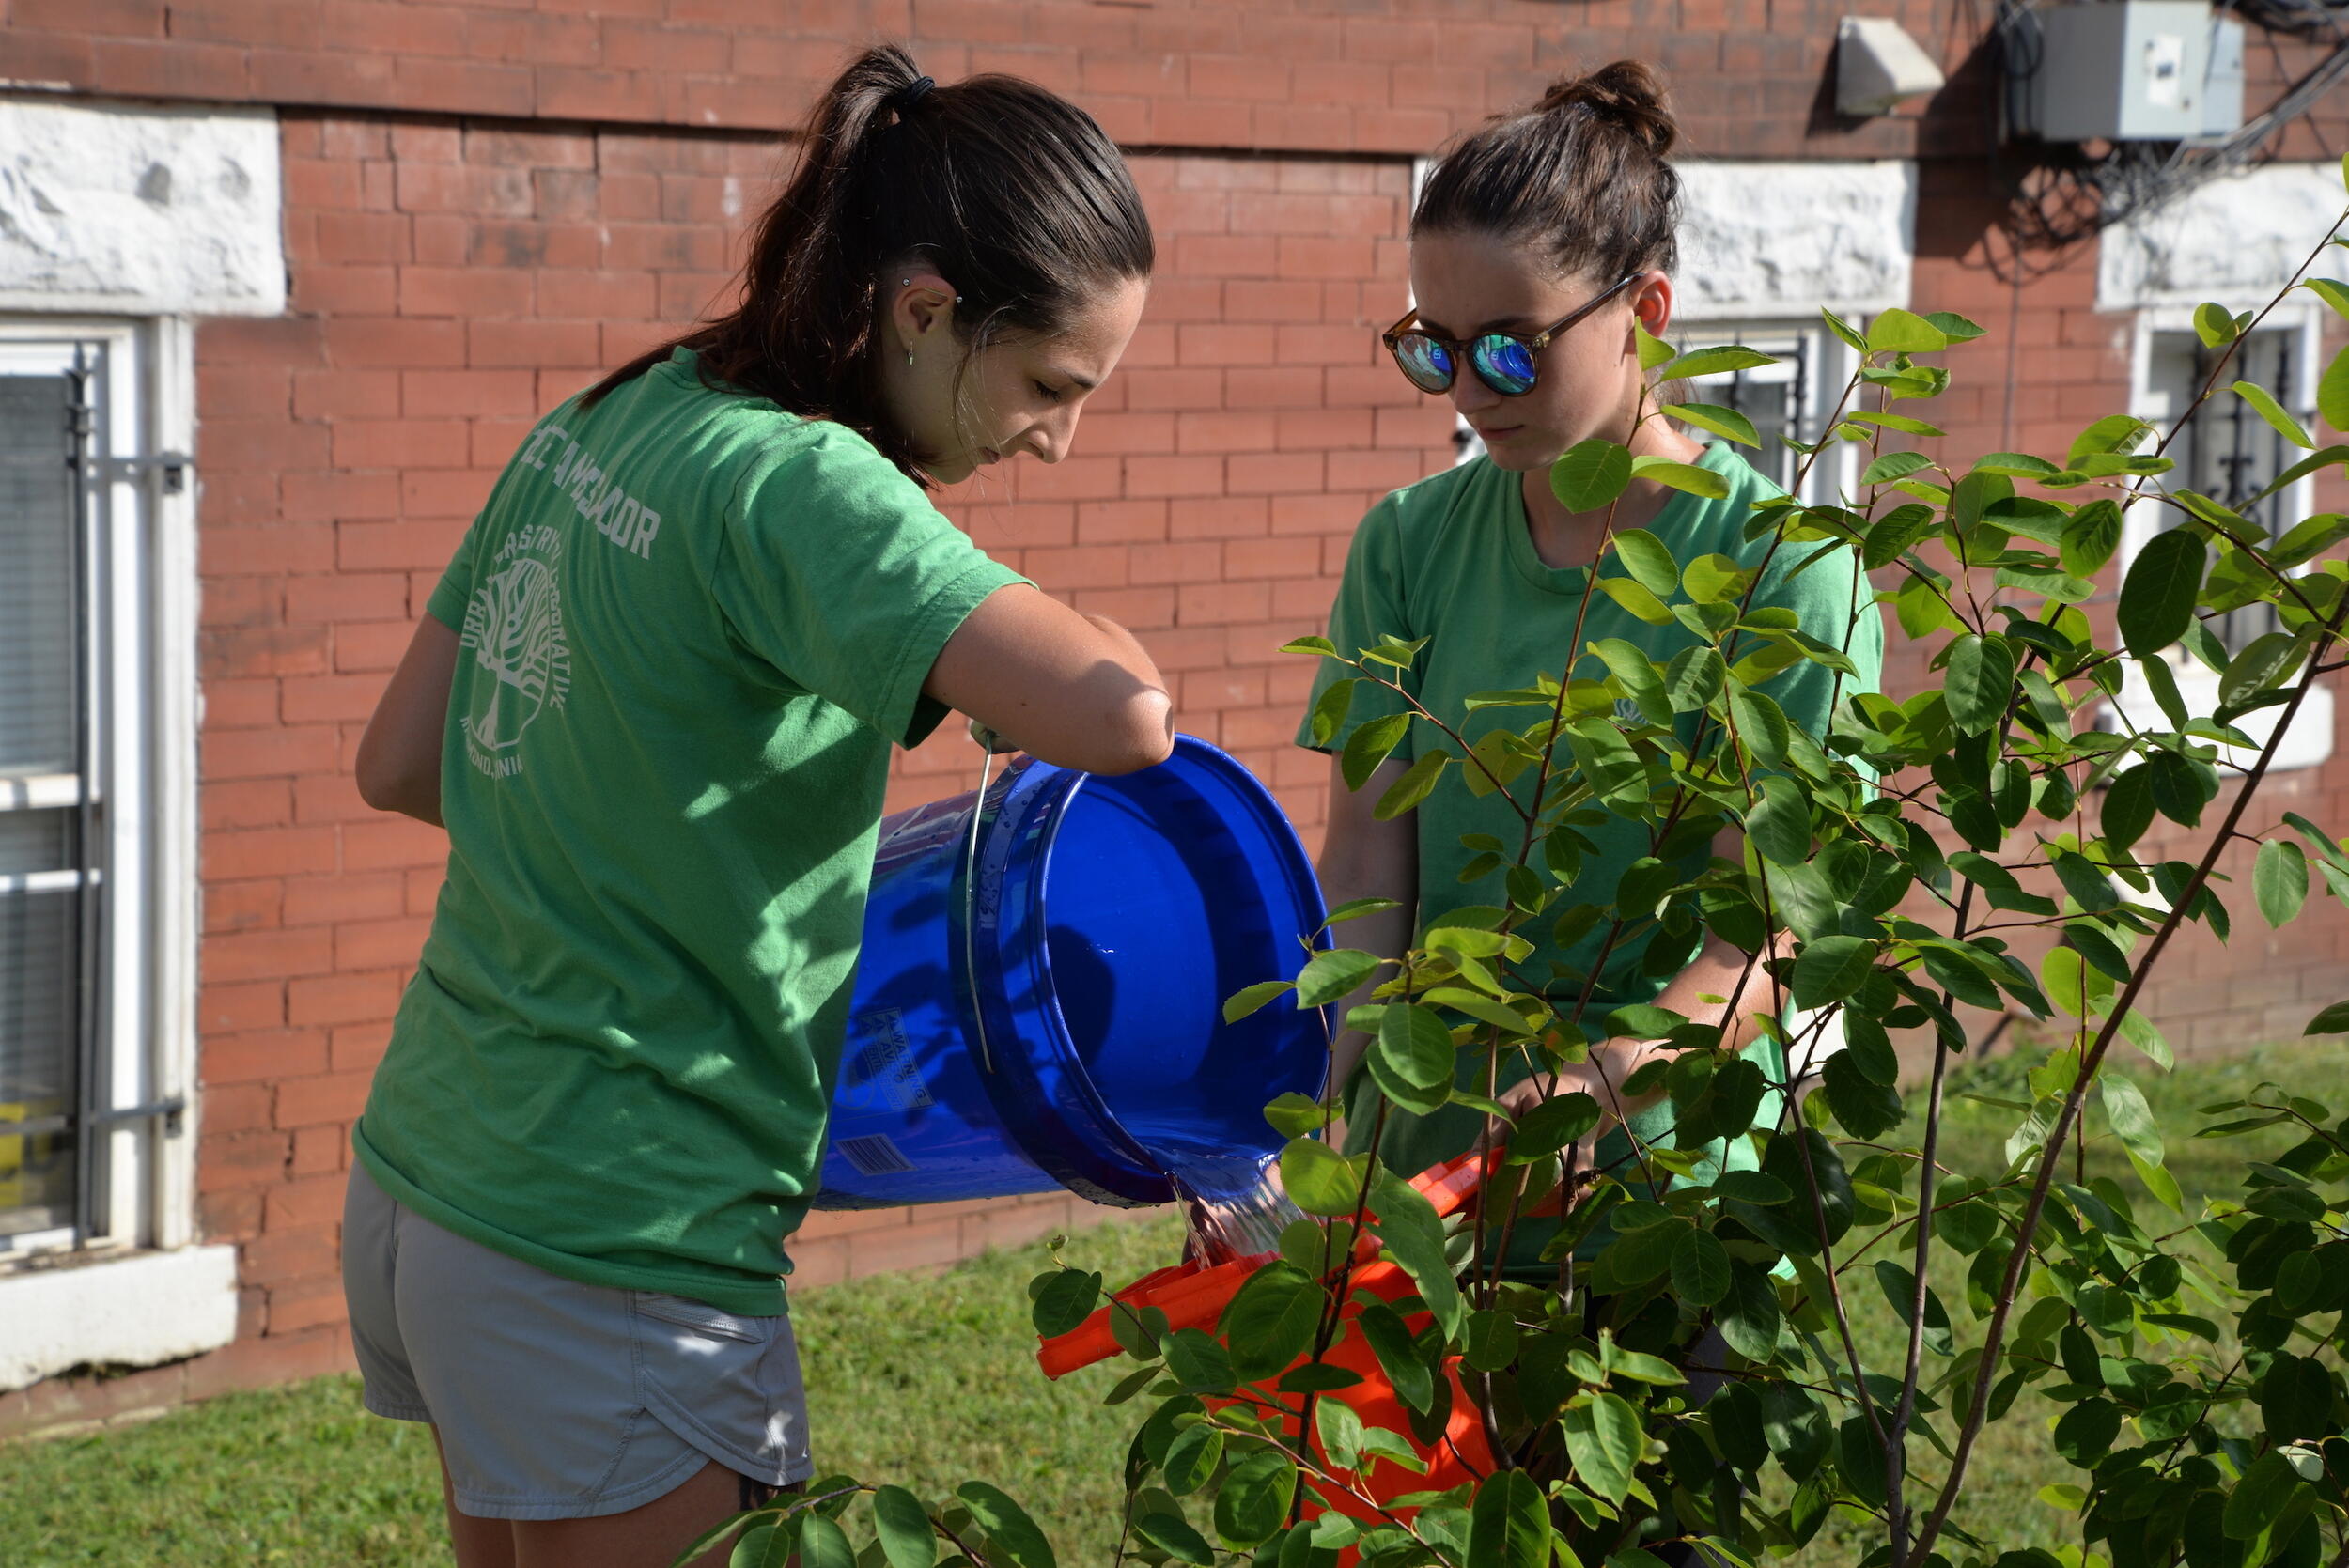 Two students — one holding a traffic cone and another holding a bucket — refill a water bag surrounding a young tree.